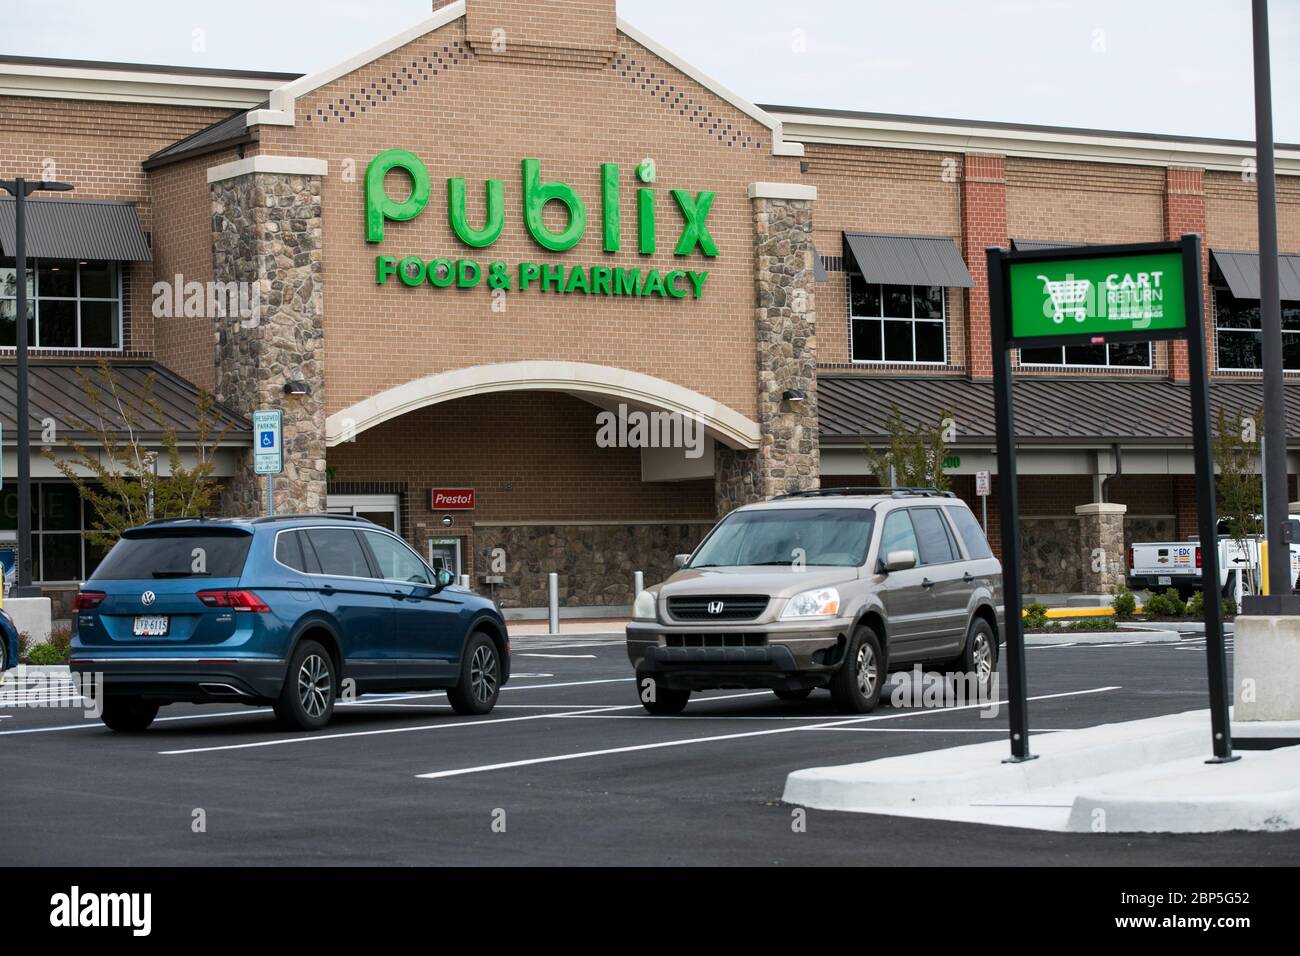 A logo sign outside of a Publix Super Markets retail grocery store location in Midlothian, Virginia on May 13, 2020. Stock Photo